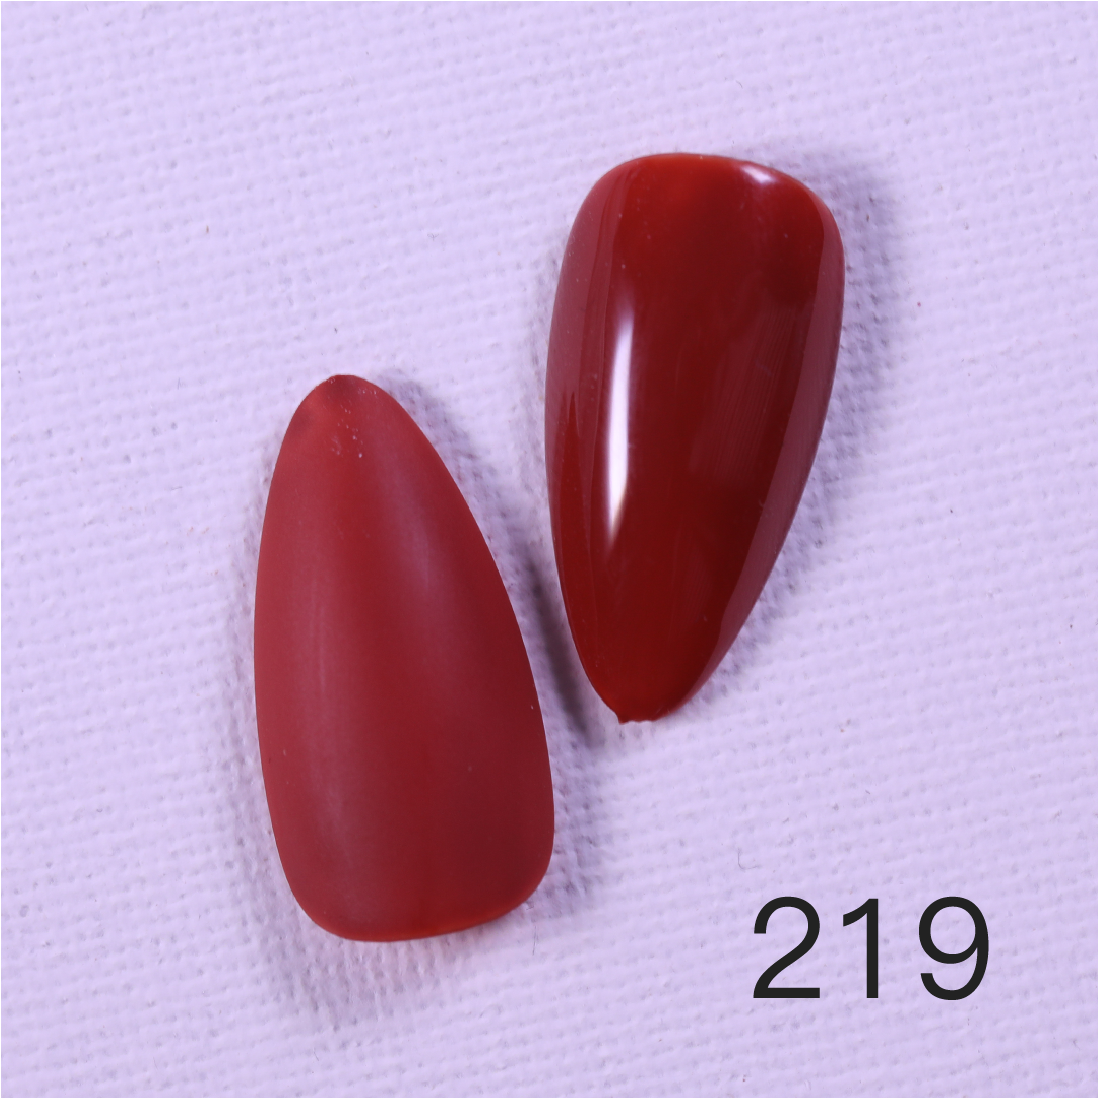 {{ GelPolish_USA }} GelPolish USA 219 GelPolish USA Mela Mela Gel Polish Colour - 80 colors available to choose from - {{ UV_Drying_machine}} - {{ Powerful_LED_Nail_Dryer}} {{ Gelish }} {{Gel_nail_polish}} {{ Gel_polish }}